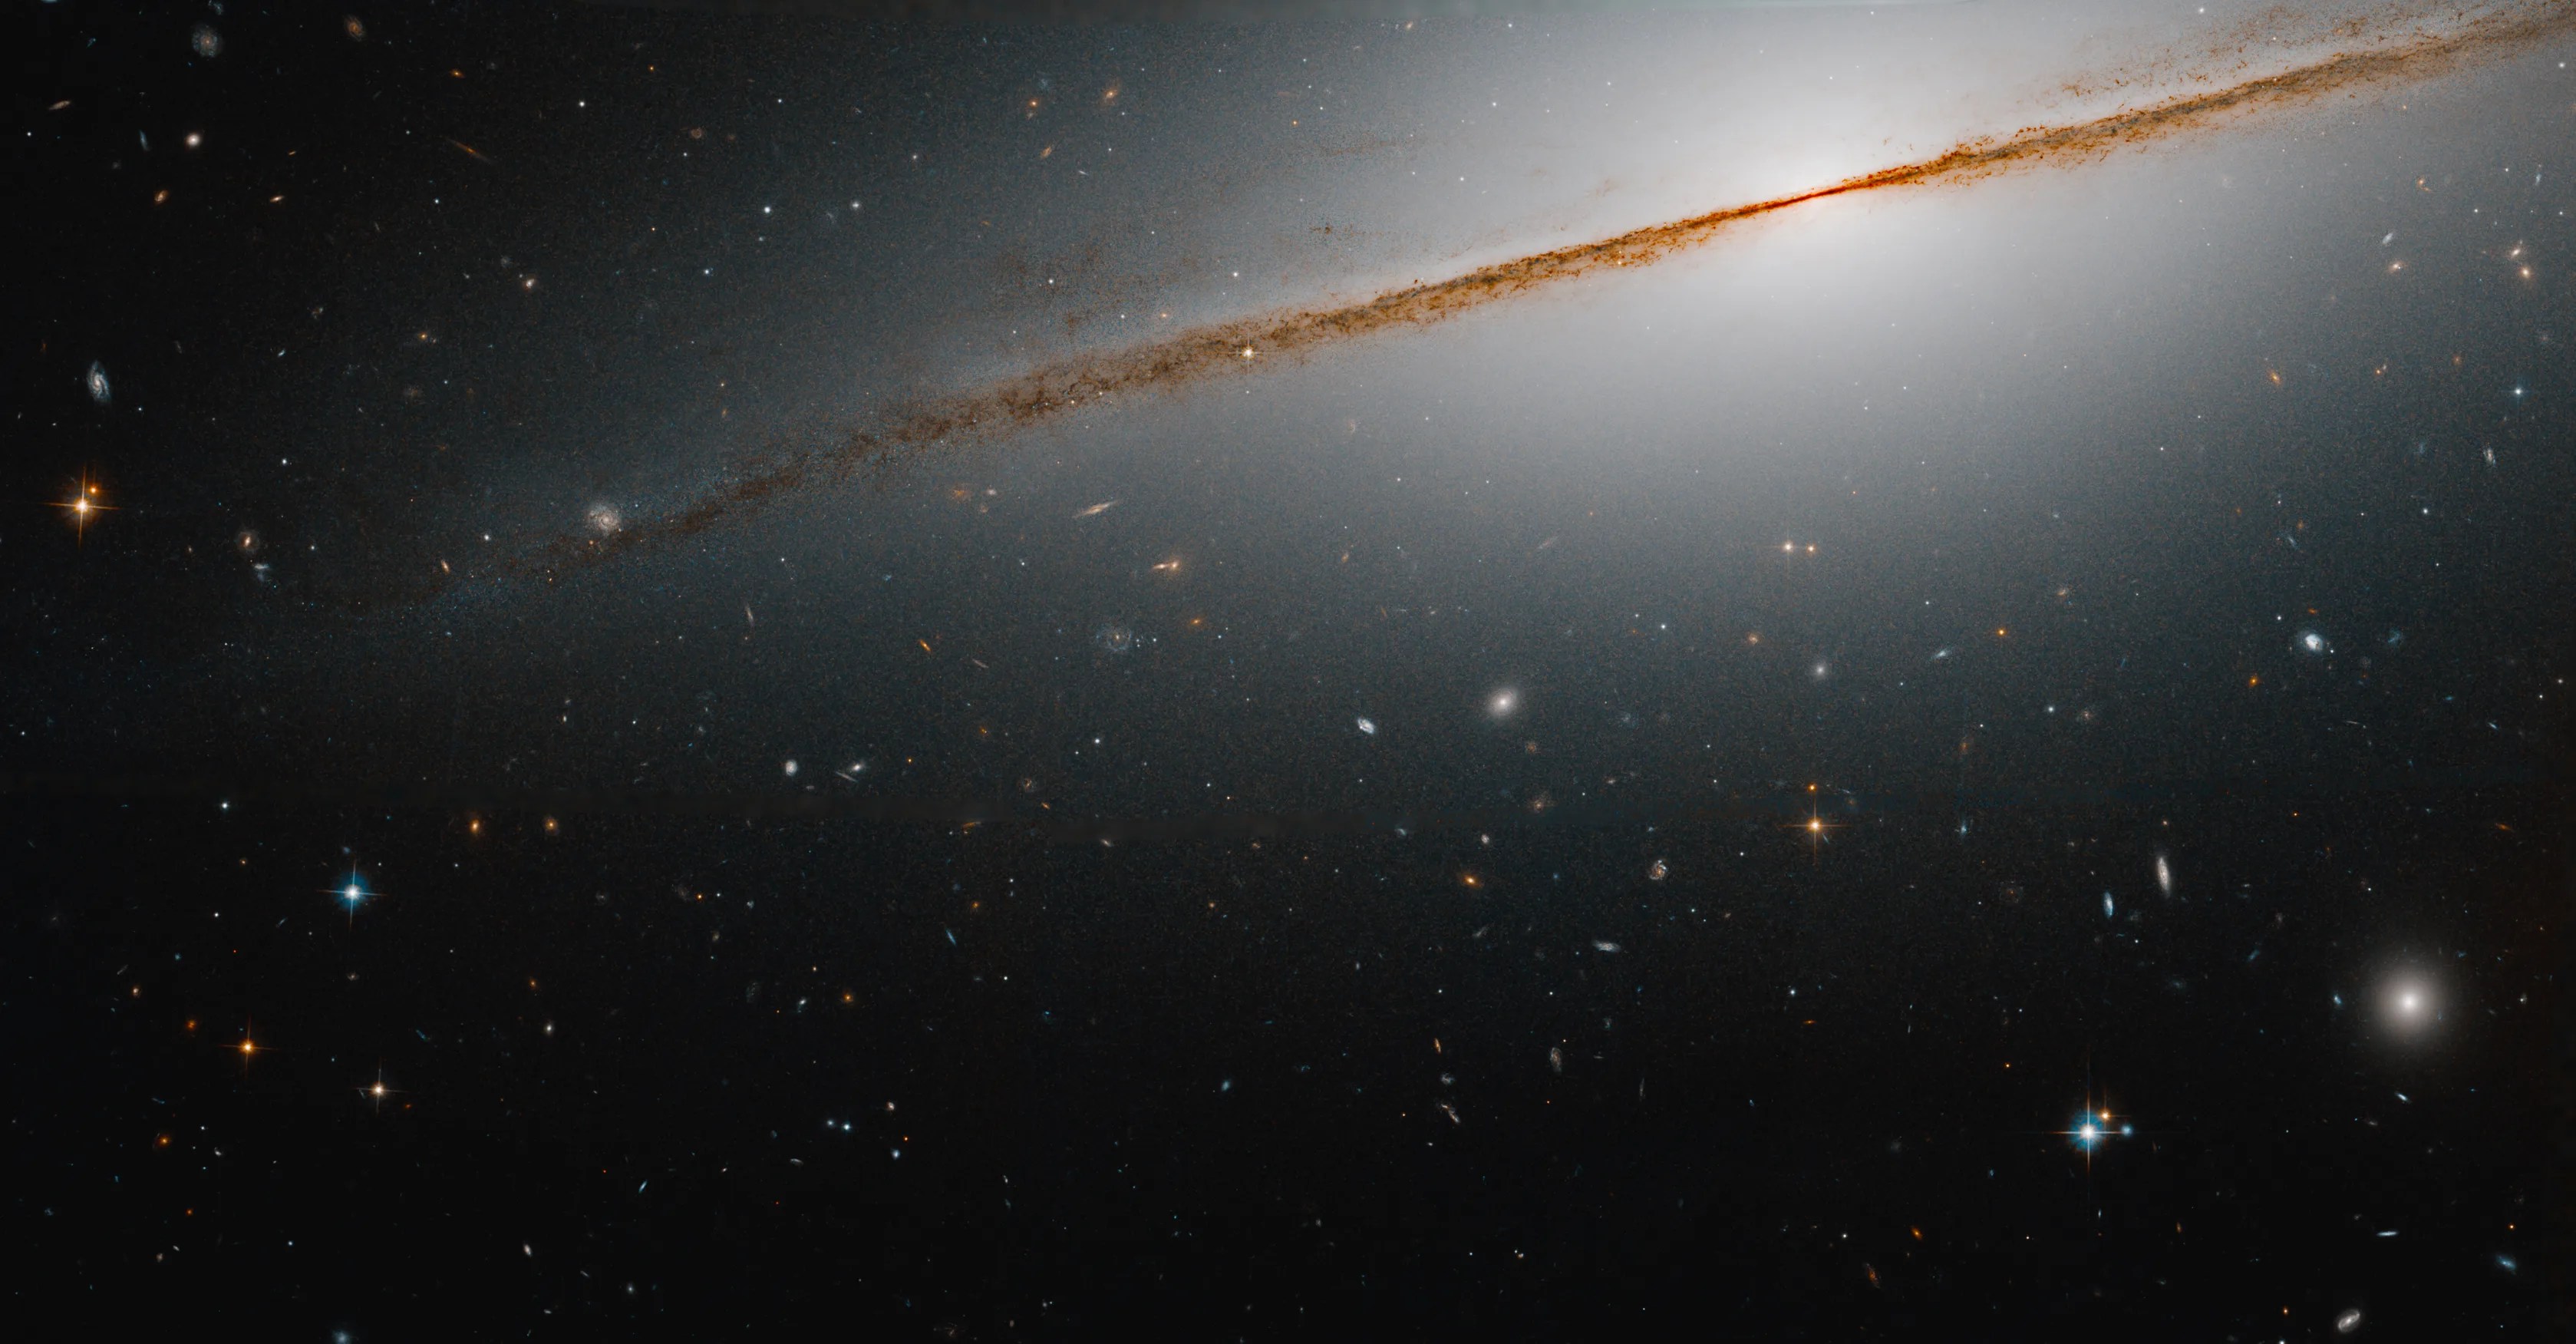 Edge-on galaxy, with a distinctive dust lane, extending from upper right to middle-left of the image. distant galaxies dot the scene.